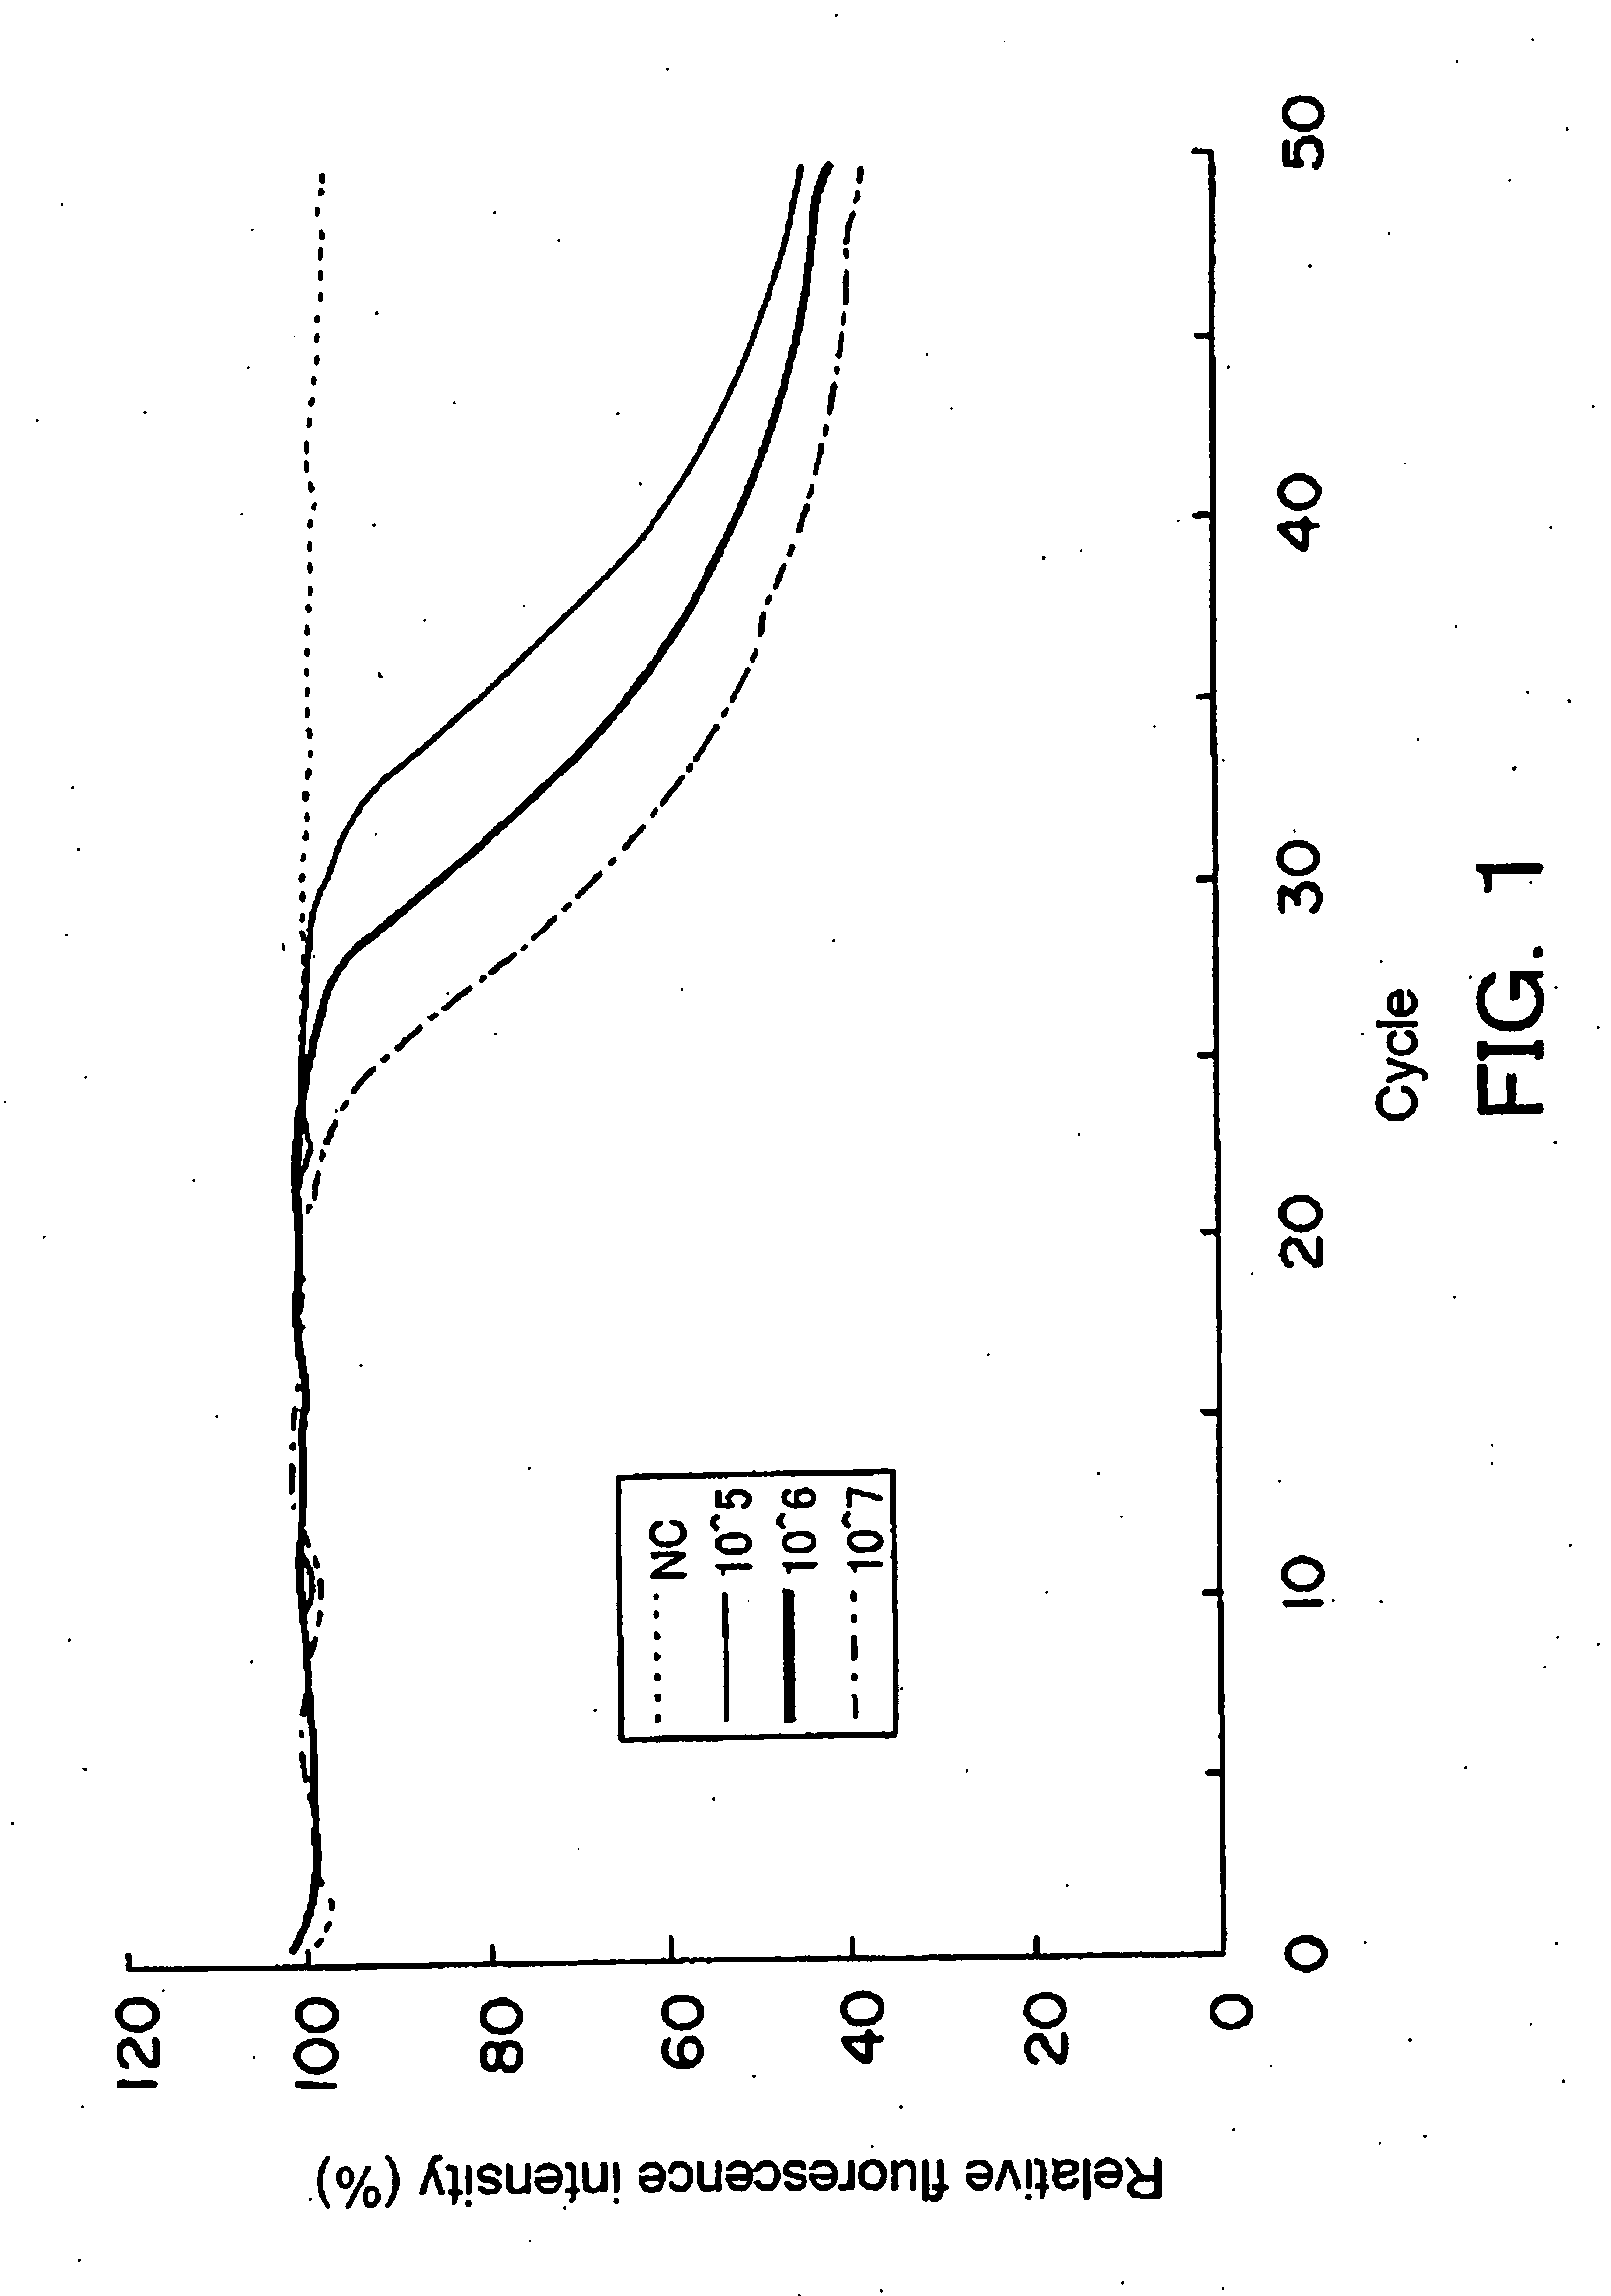 Method of detecting or quantitatively determining mitochondrial dna 3243 variation, and kit therefor